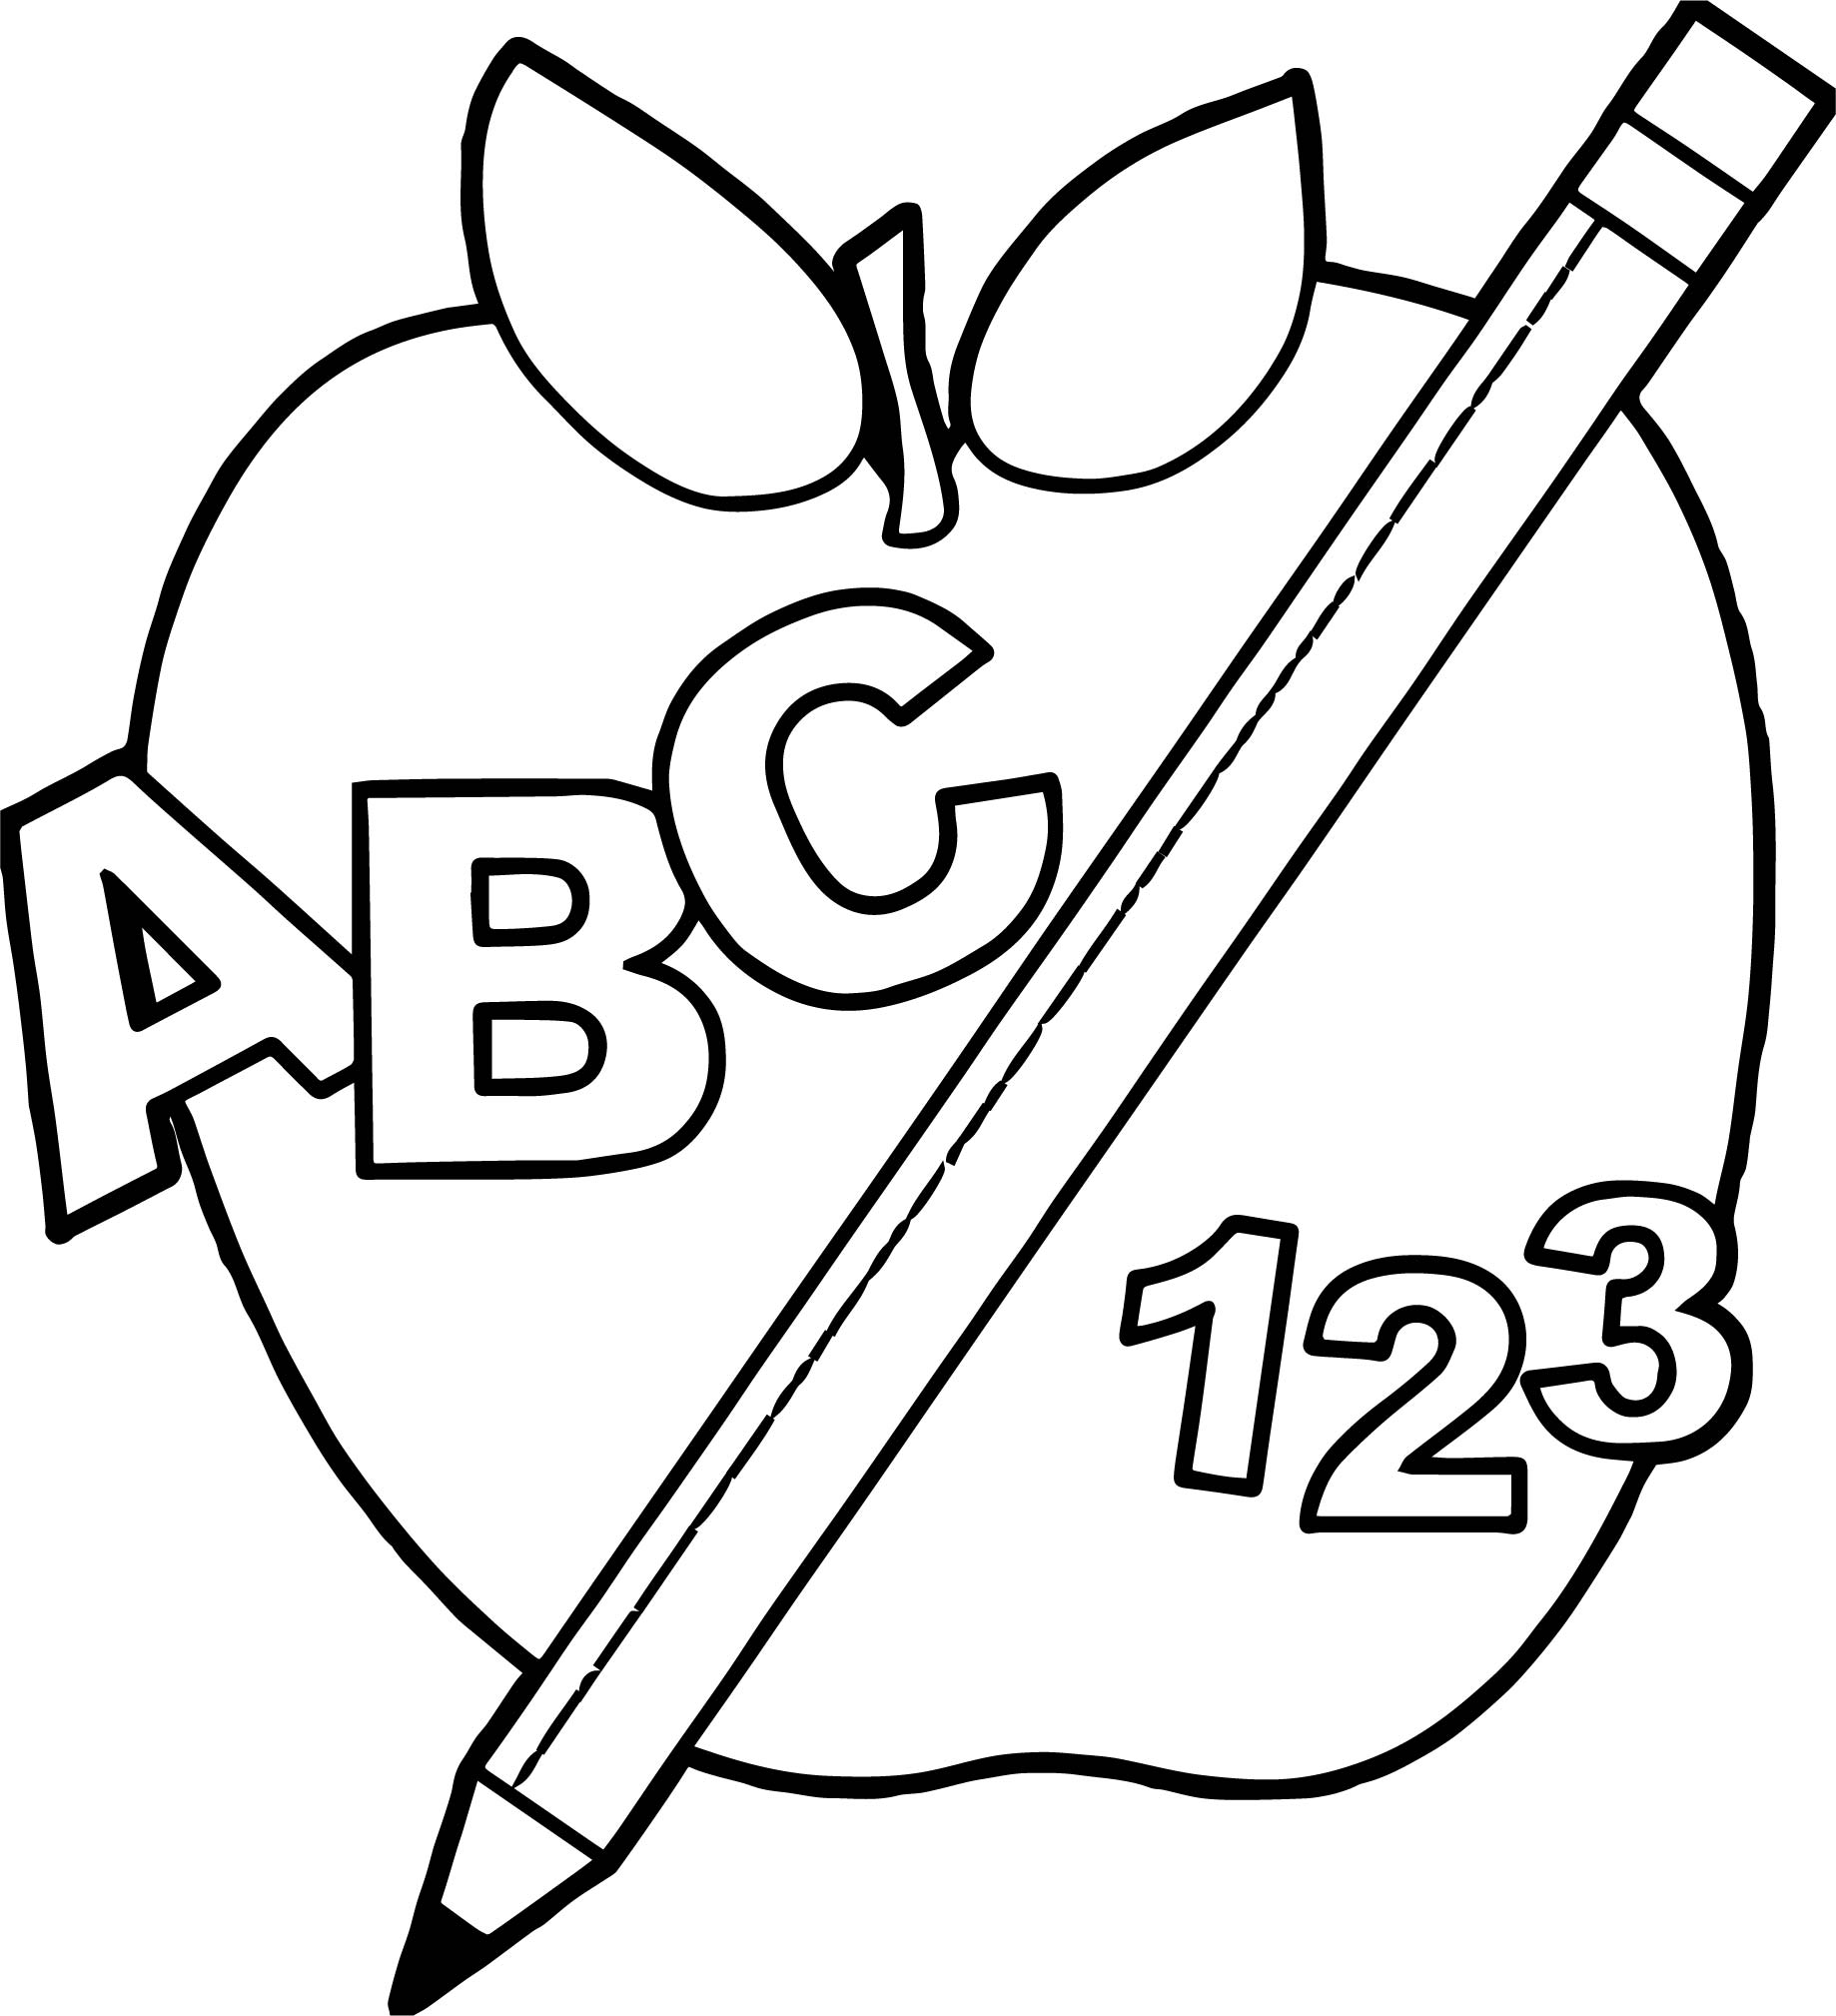 Download Blocks Coloring Pages - Coloring Home